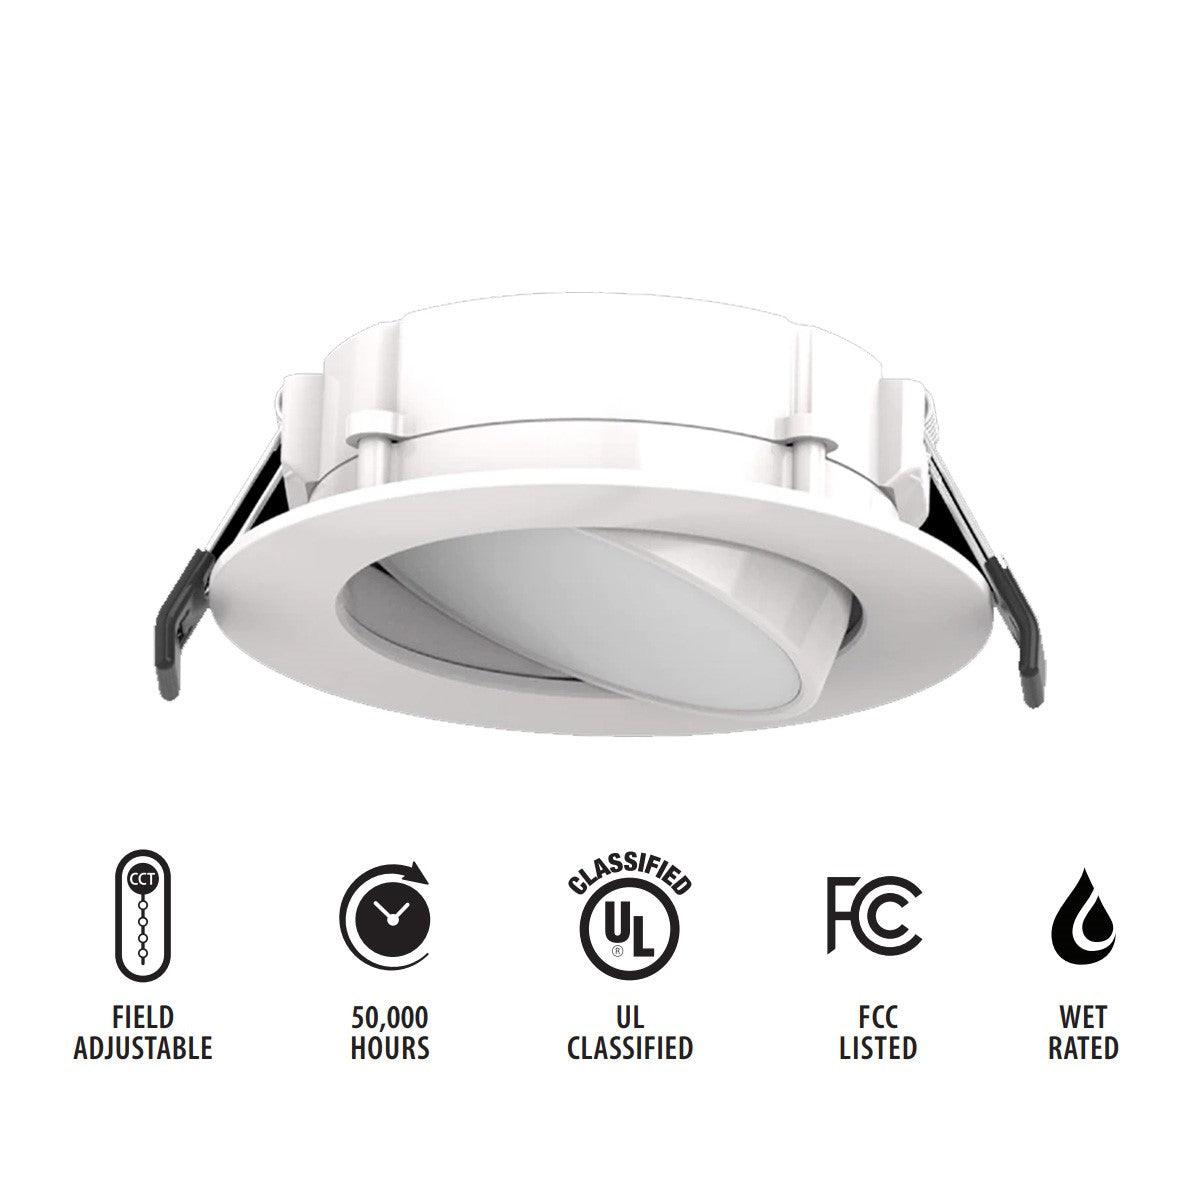 4 In. Adjustable Wafer Canless LED Recessed Light, 8 Watt, 700 Lumens, Selectable CCT, 2700K to 5000K, Smooth Trim